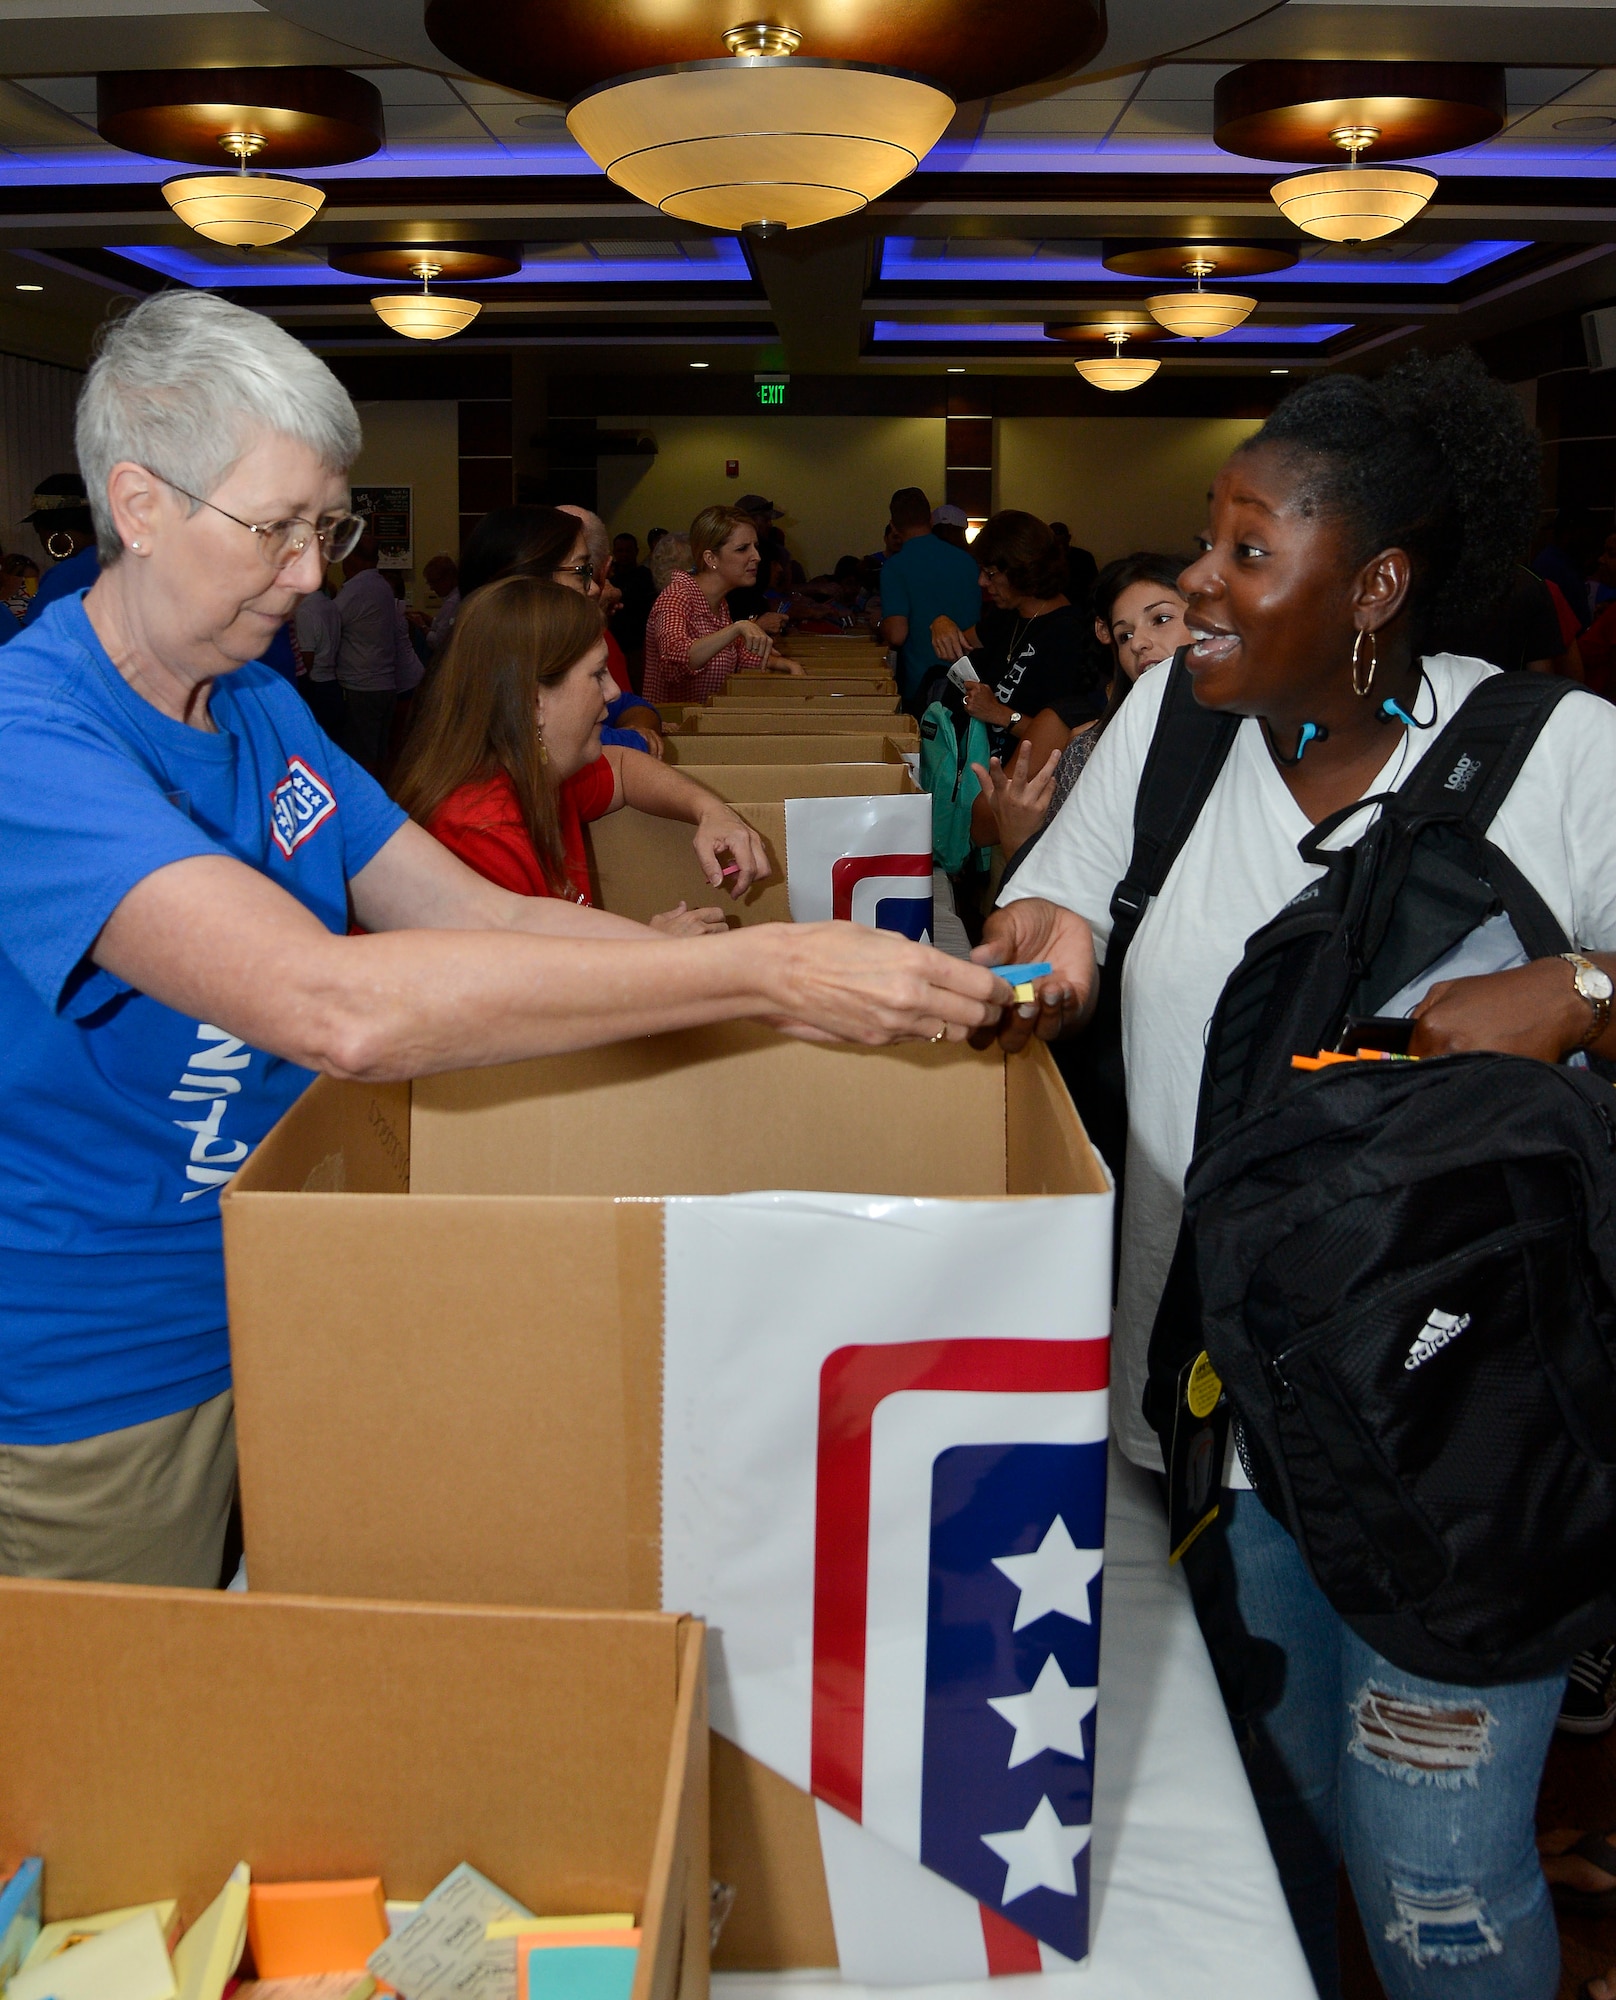 Barbara Szatkowski, a volunteer from the United Service Organization, hands school supplies to Master Sgt. Widlene Harrell, J1 superintendent assigned to Special Operations Command Central, during the Back to School Fair at MacDill Air Force Base, Fla., July 30, 2016. Participating families received backpacks, school supplies and resources, and giveaways from community agencies and sponsors. (U.S. Air Force photo by Staff Sgt. Shandresha Mitchell)